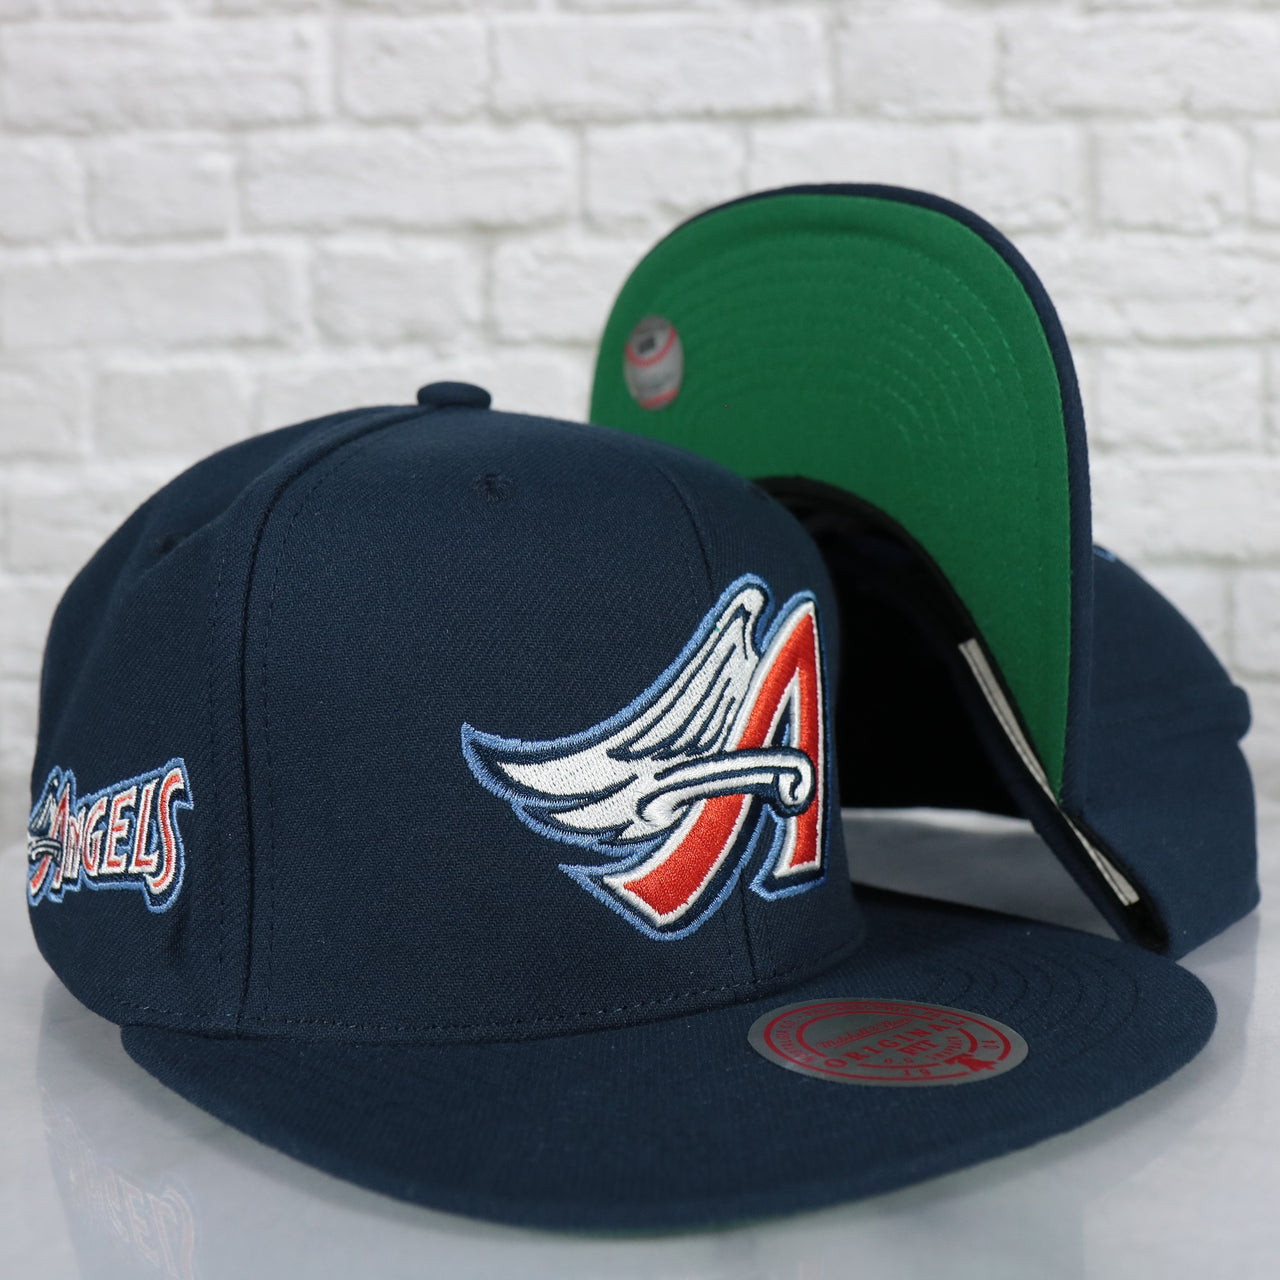 Anaheim Angels Cooperstown "Angels" Script side patch Evergreen Pro Variety Pack | Navy Snapback Hat